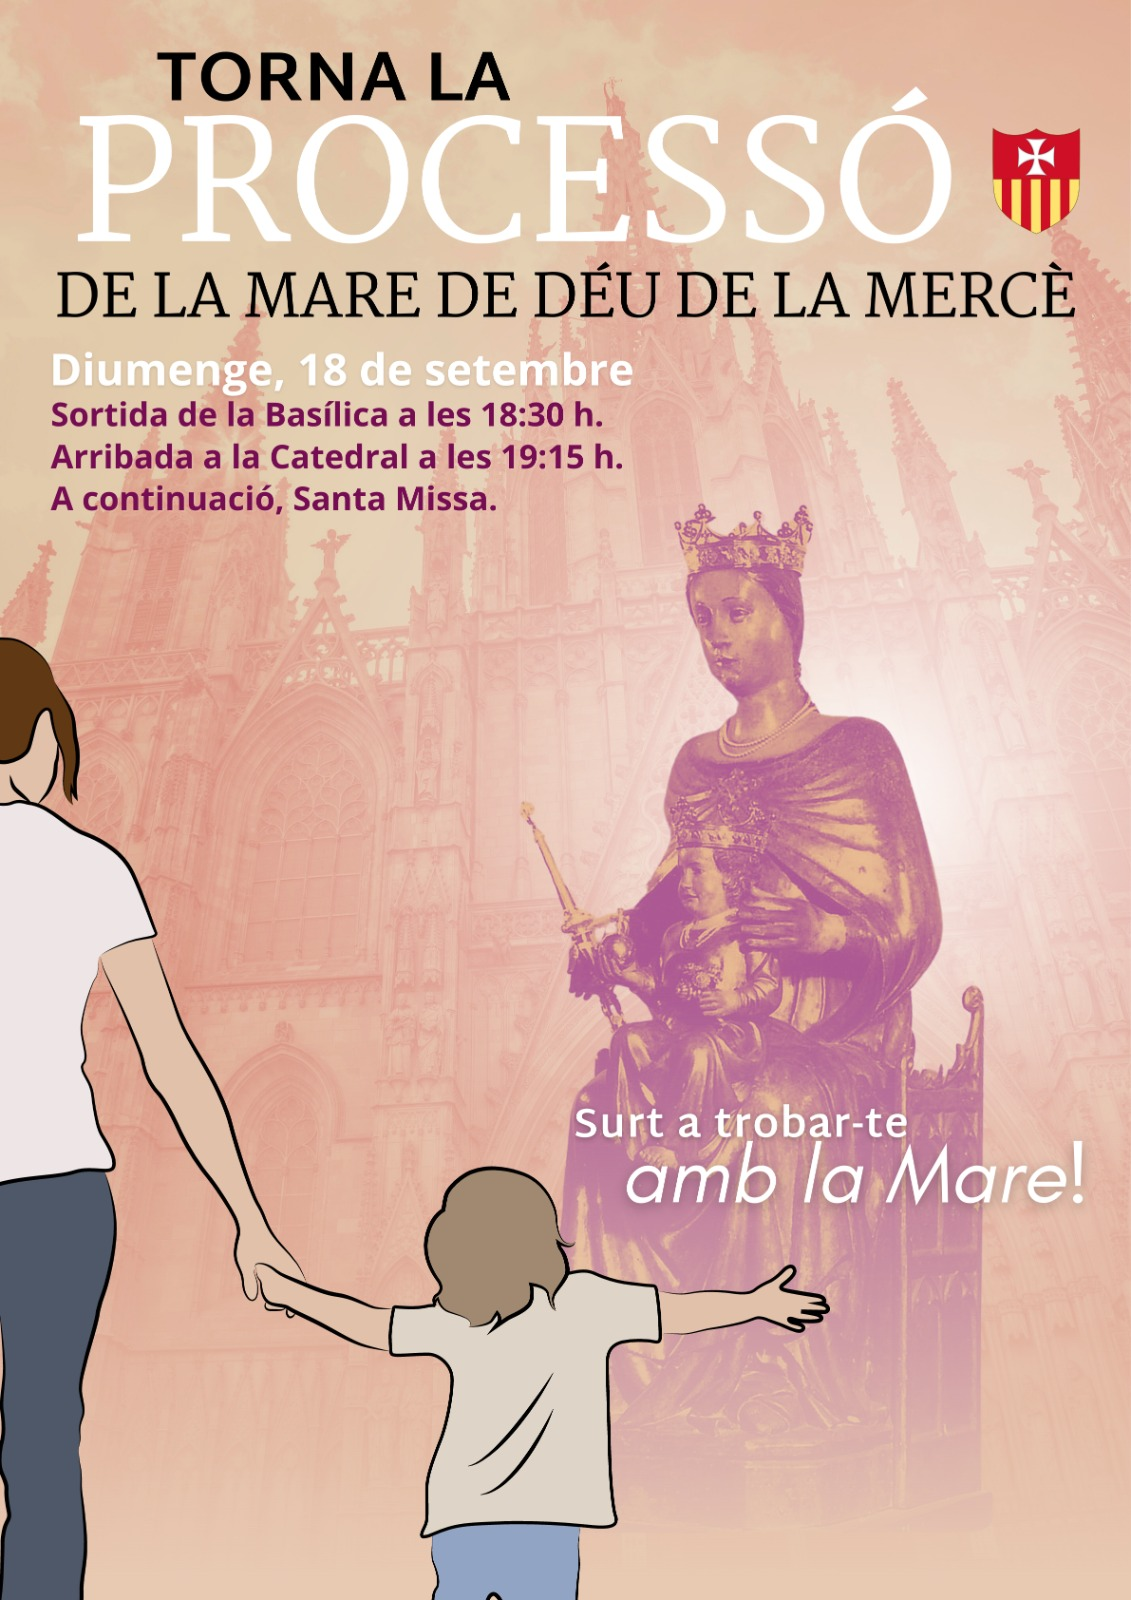 September, 18th | Procession of Our Lady of Mercy